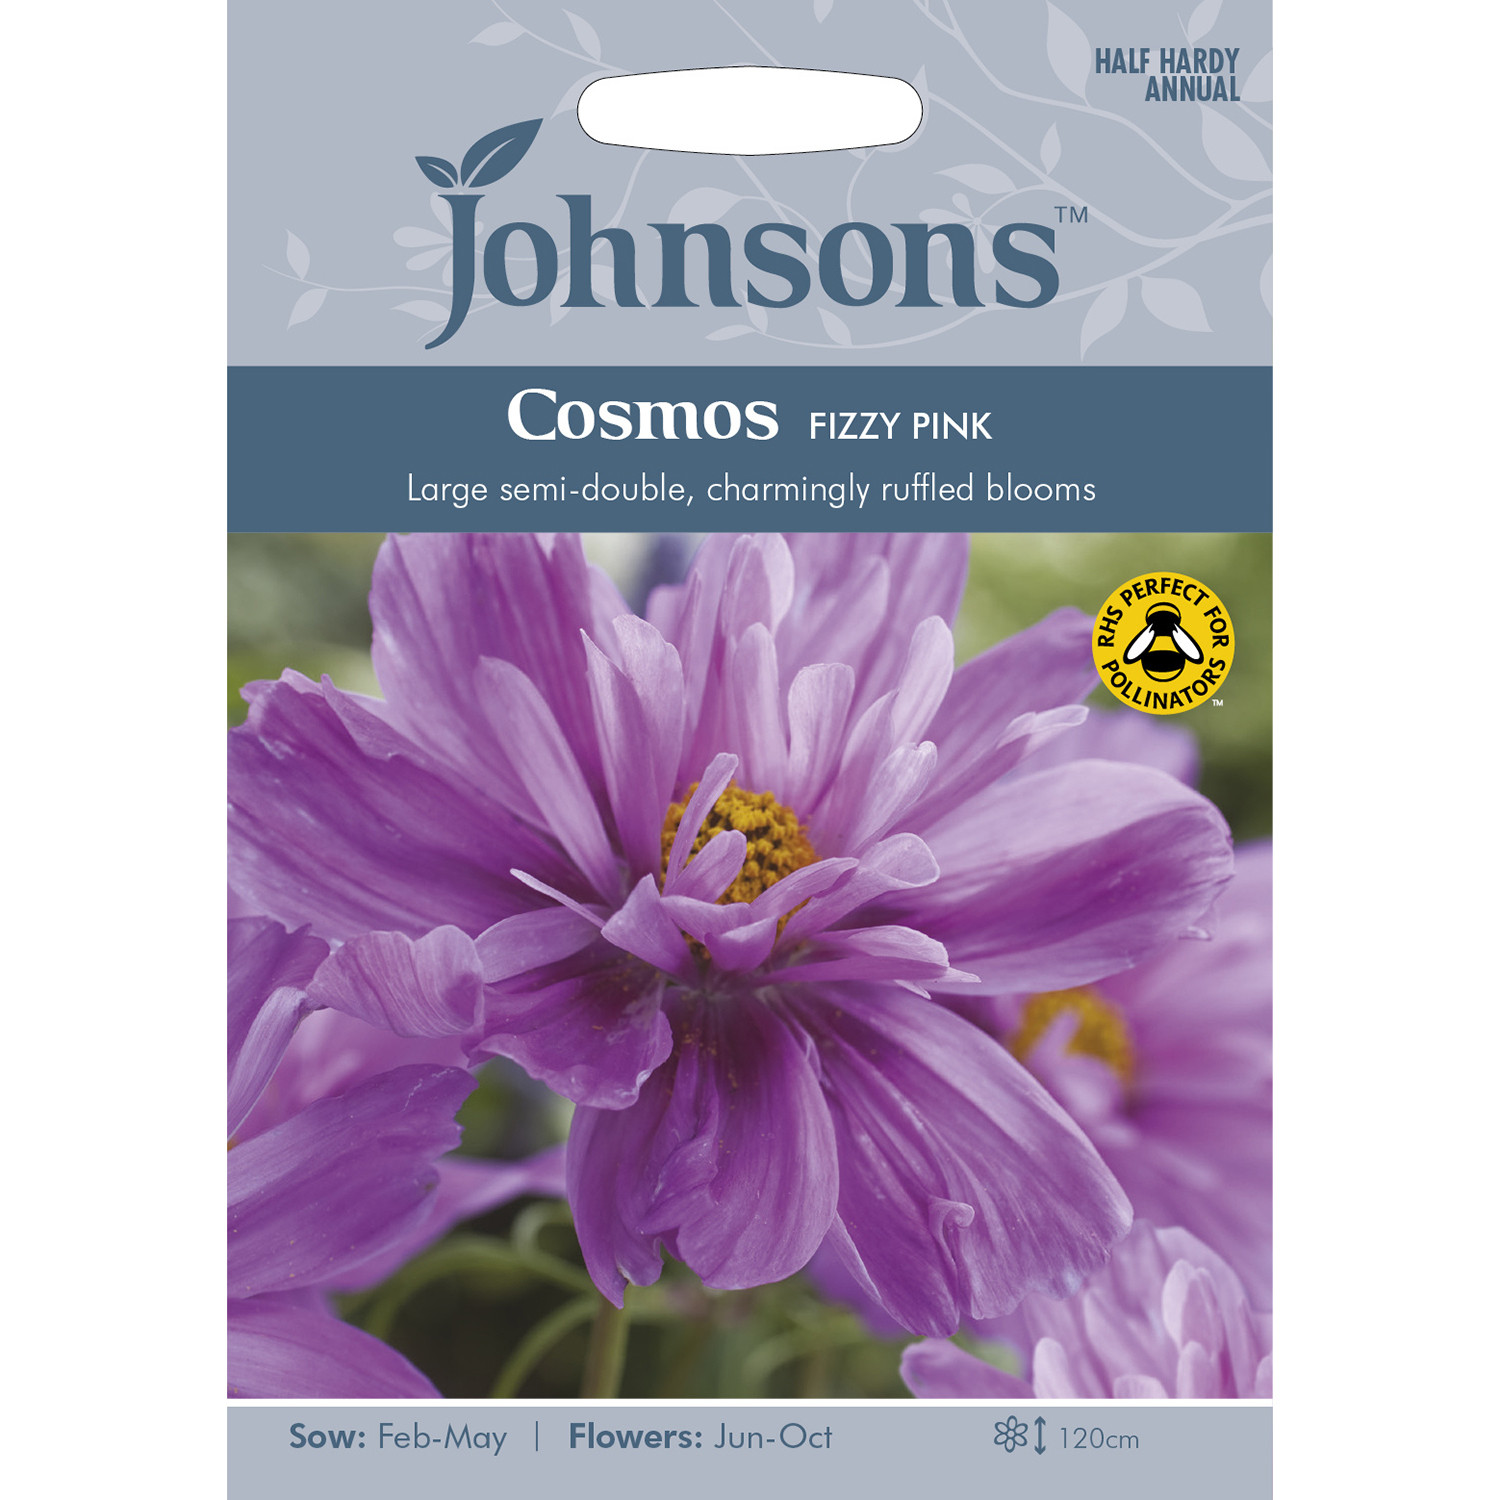 Johnsons Cosmos Fizzy Pink Flower Seeds Image 2